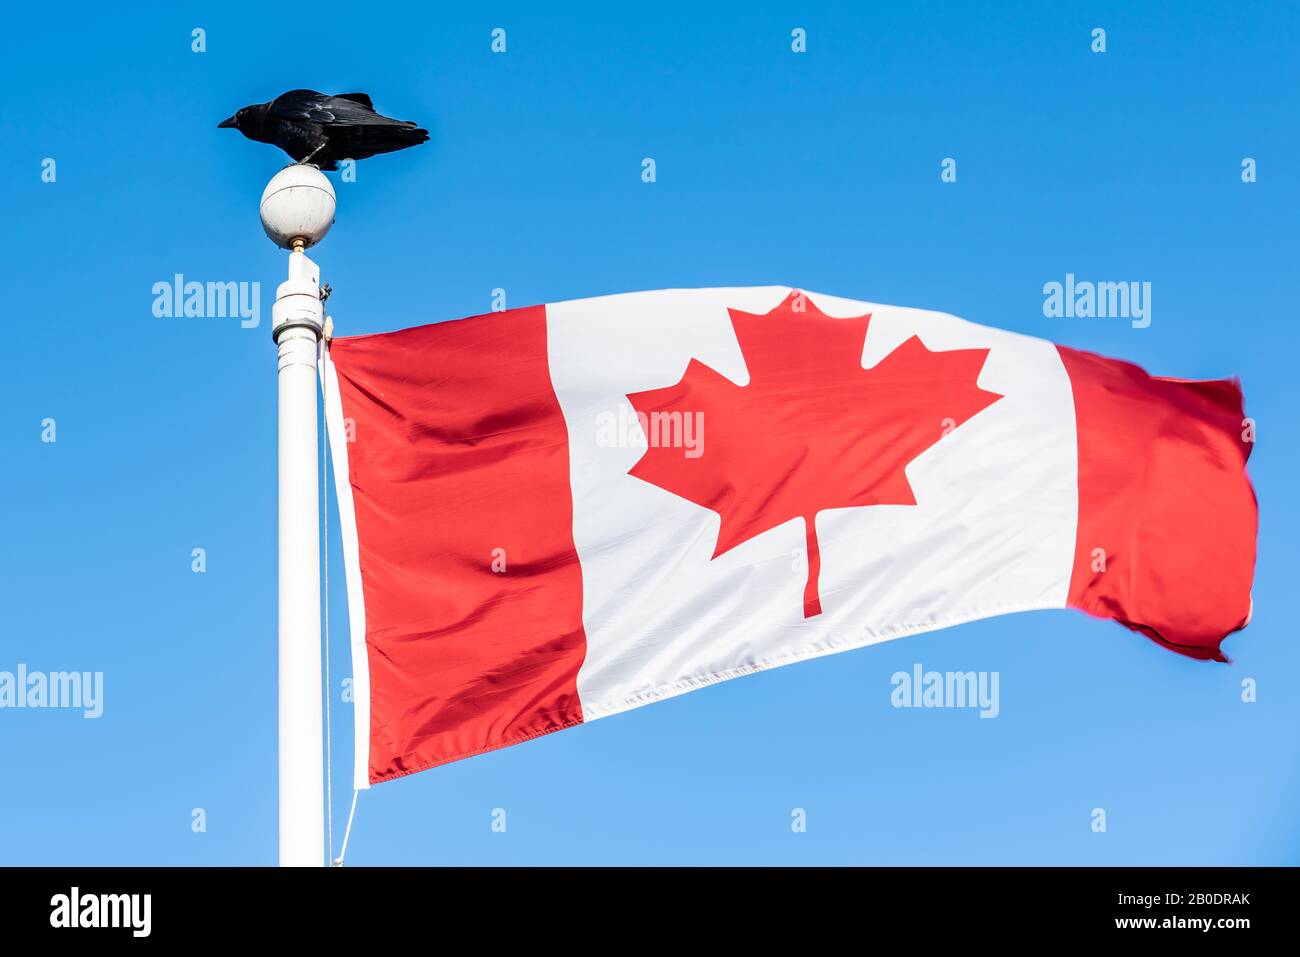 Flag of Canada with a black bird flying and waving against a beautiful blue sky. Stock Photo